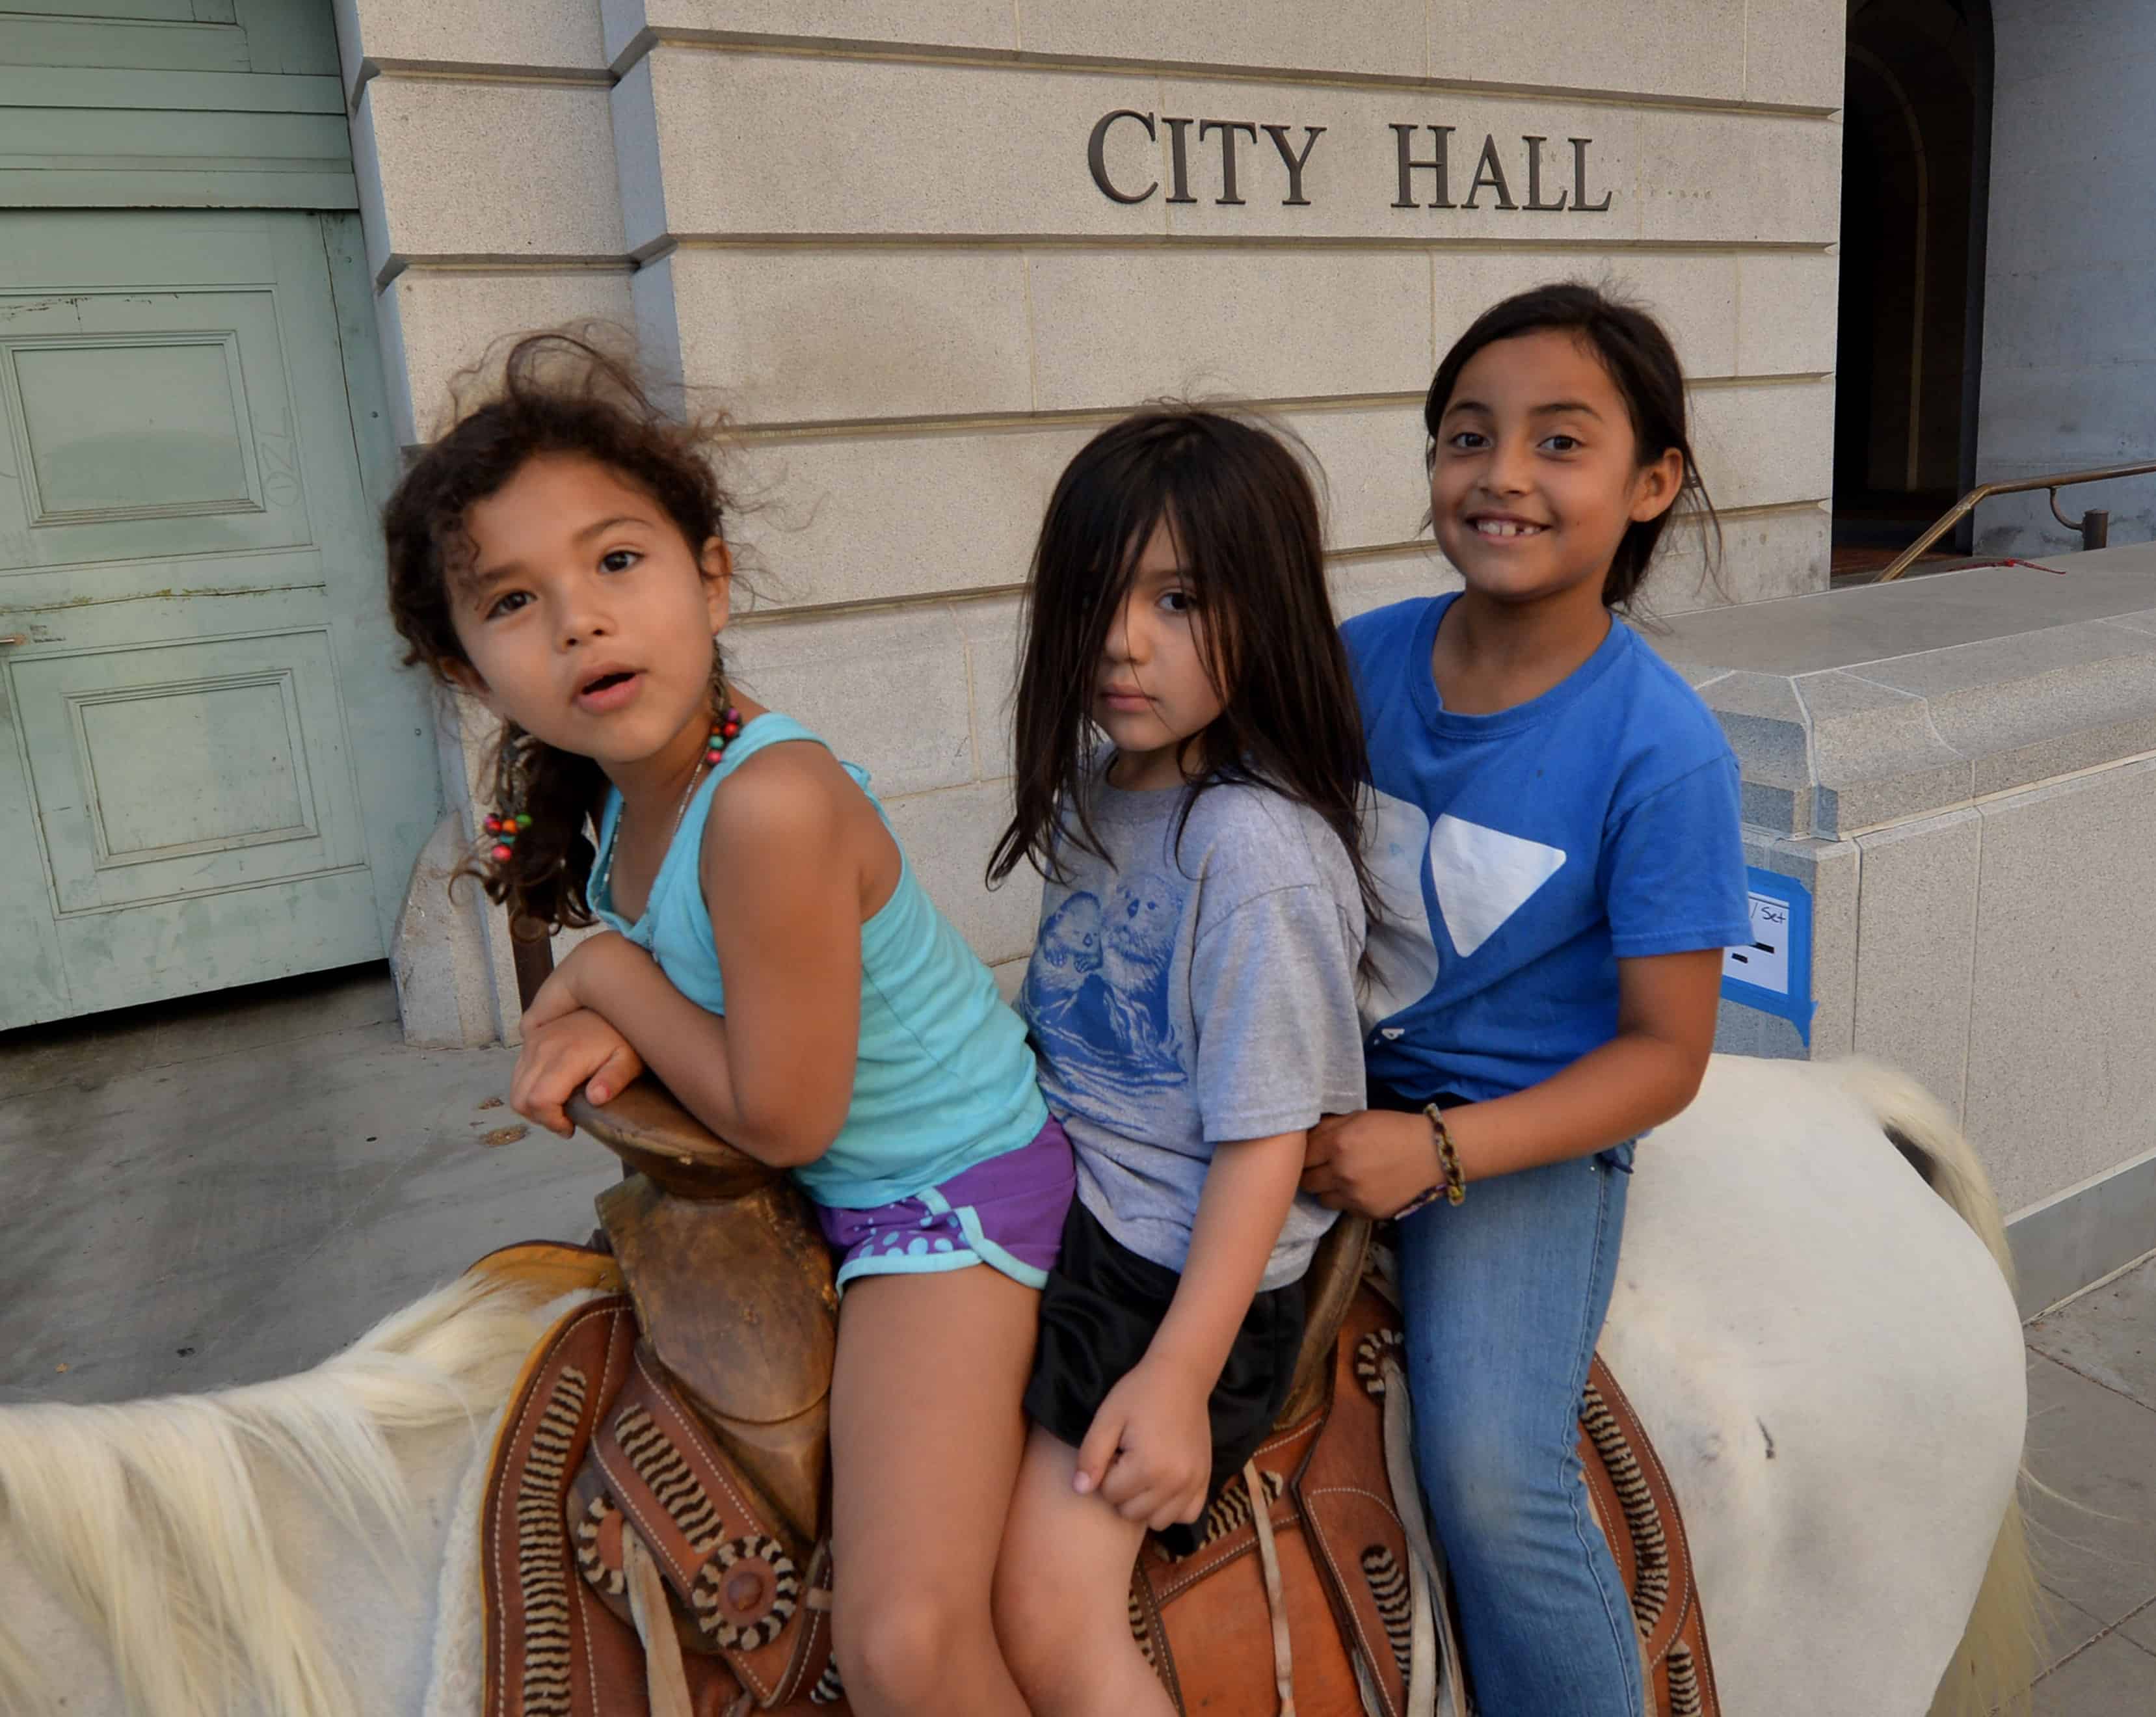 Immigrant children ride a horse past City Hall during a march in Los Angeles as part of the 300-mile 